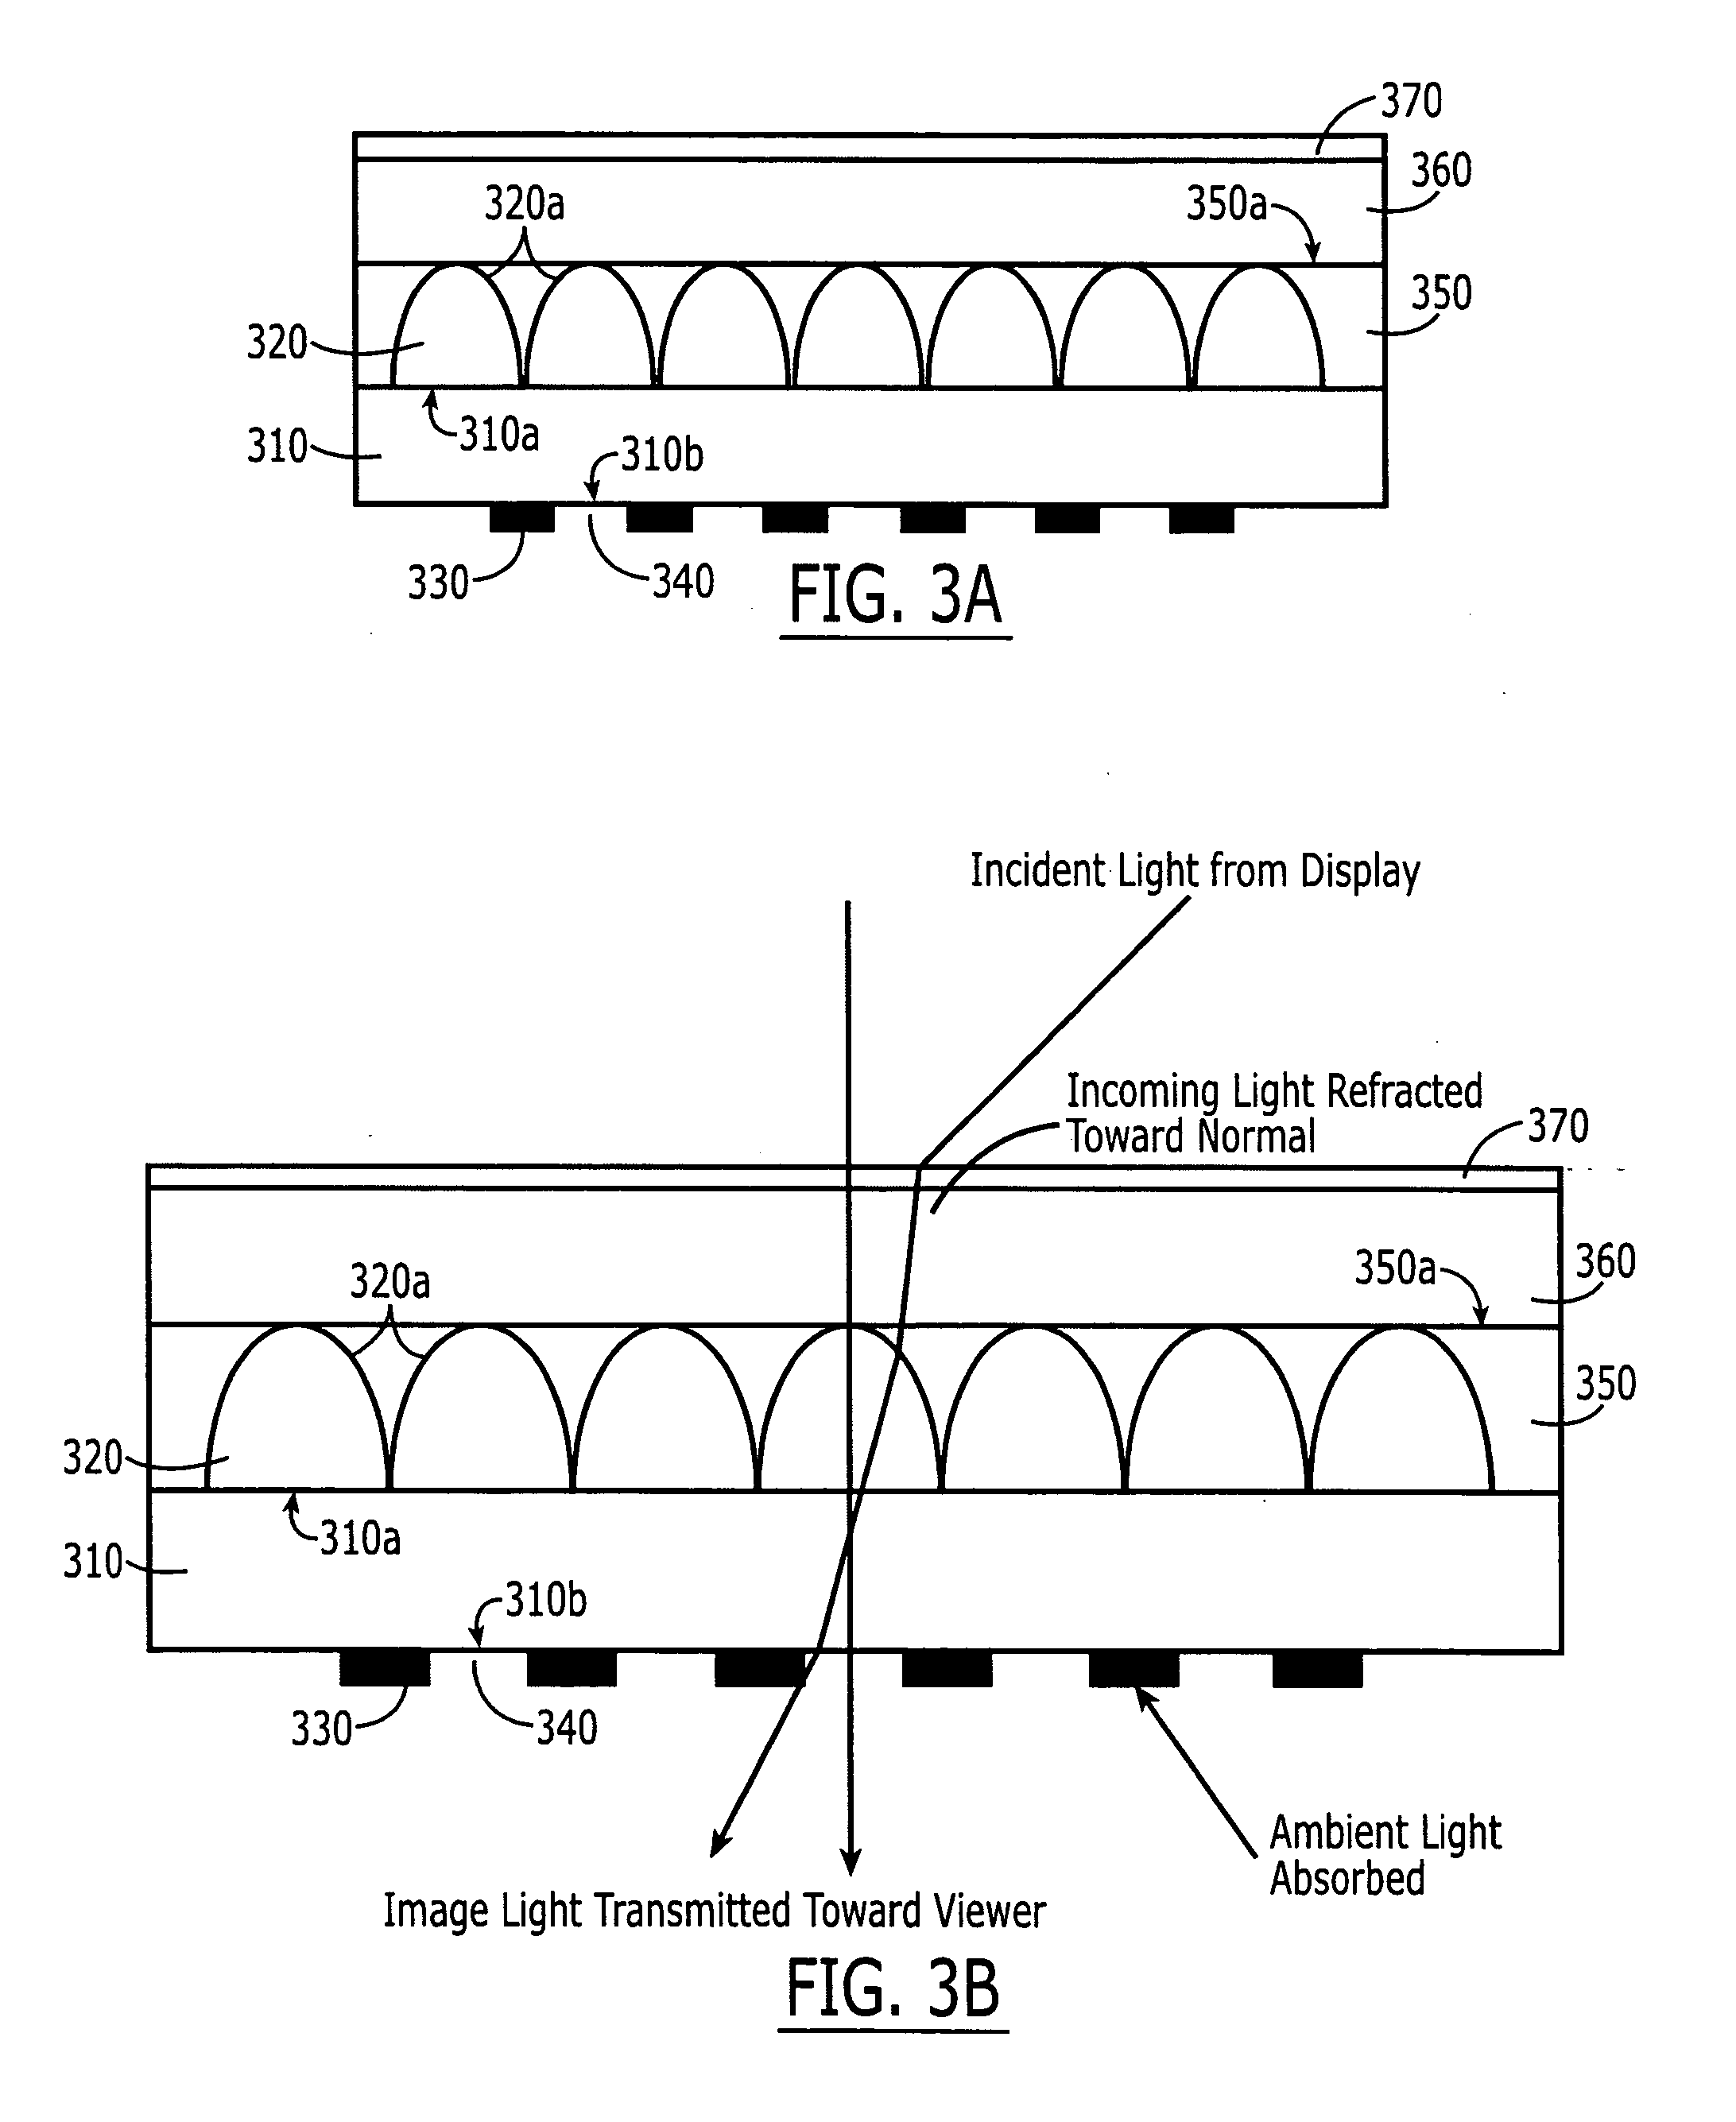 Contrast enhancement films for direct-view displays and fabrication methods therefor